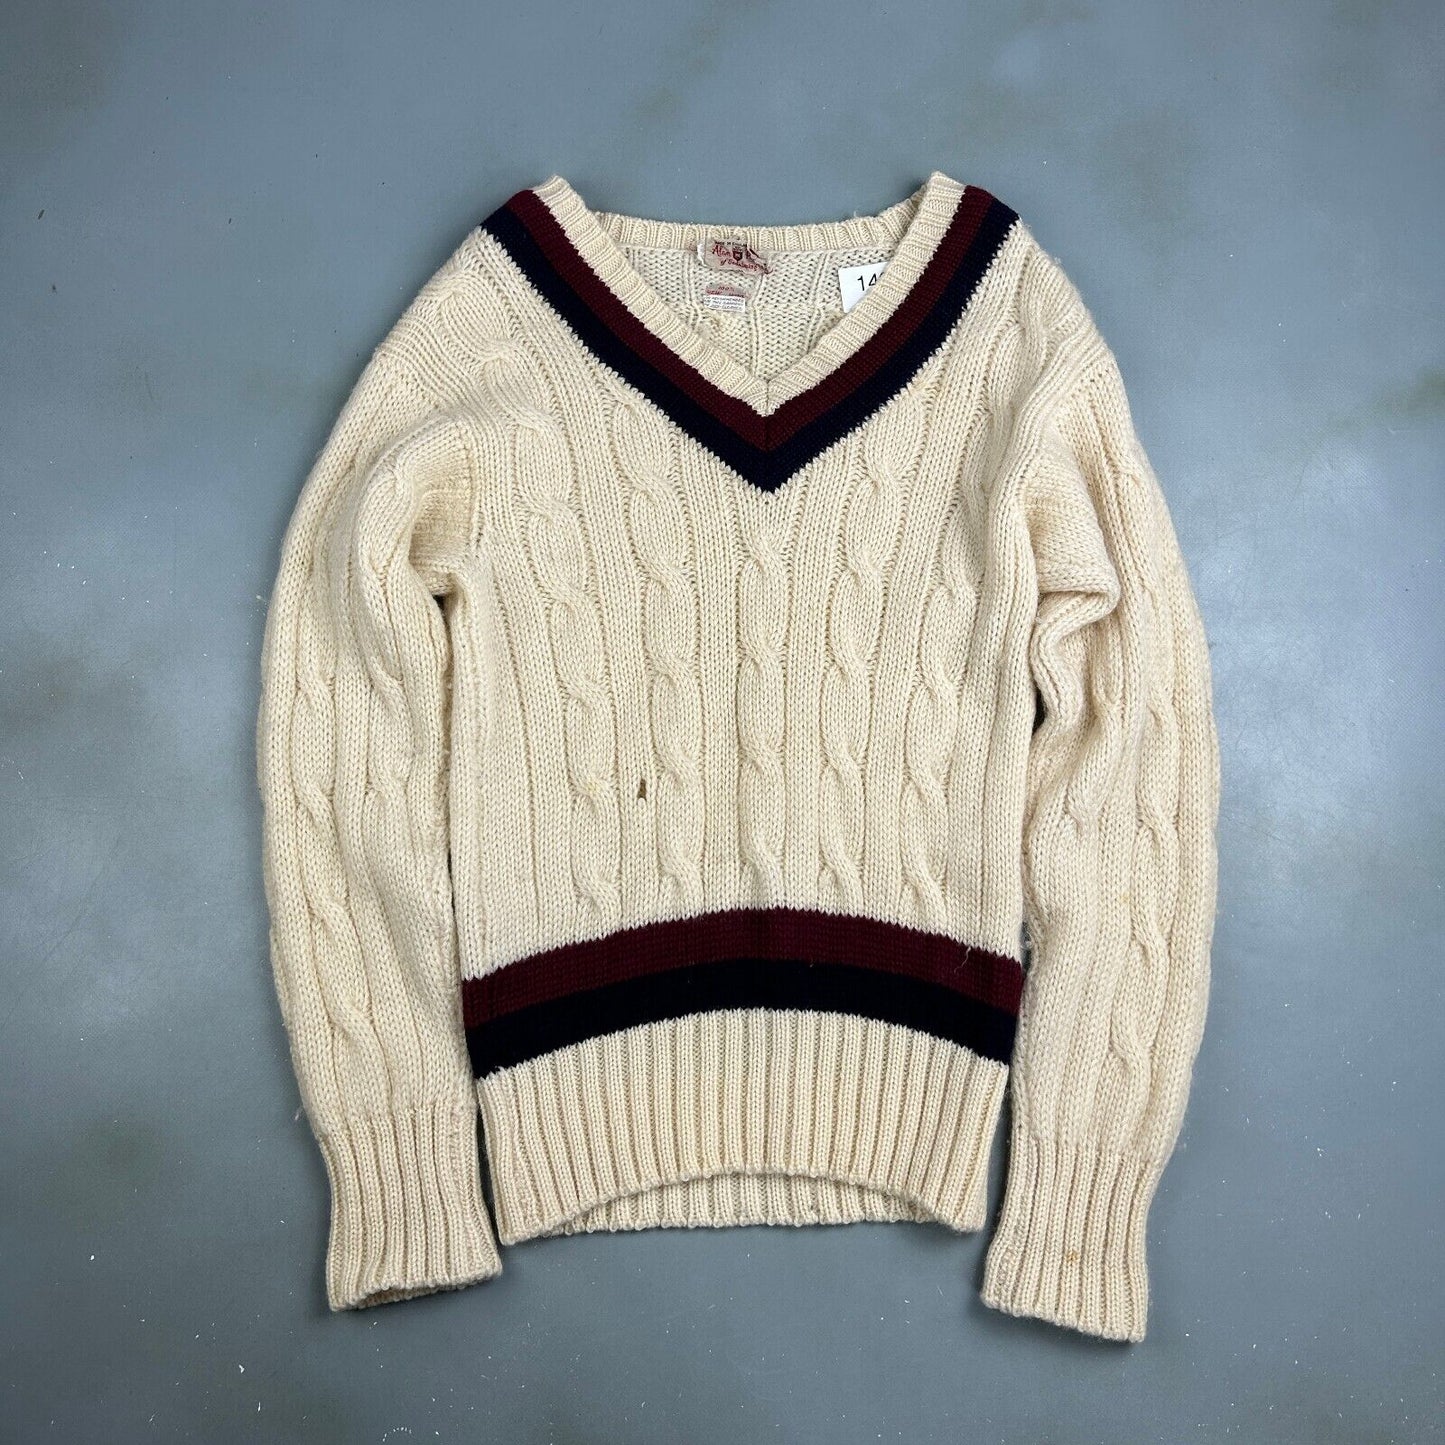 VINTAGE 70s | Cricket Tennis Wool Knit Sweater sz Sm Adult Made in England